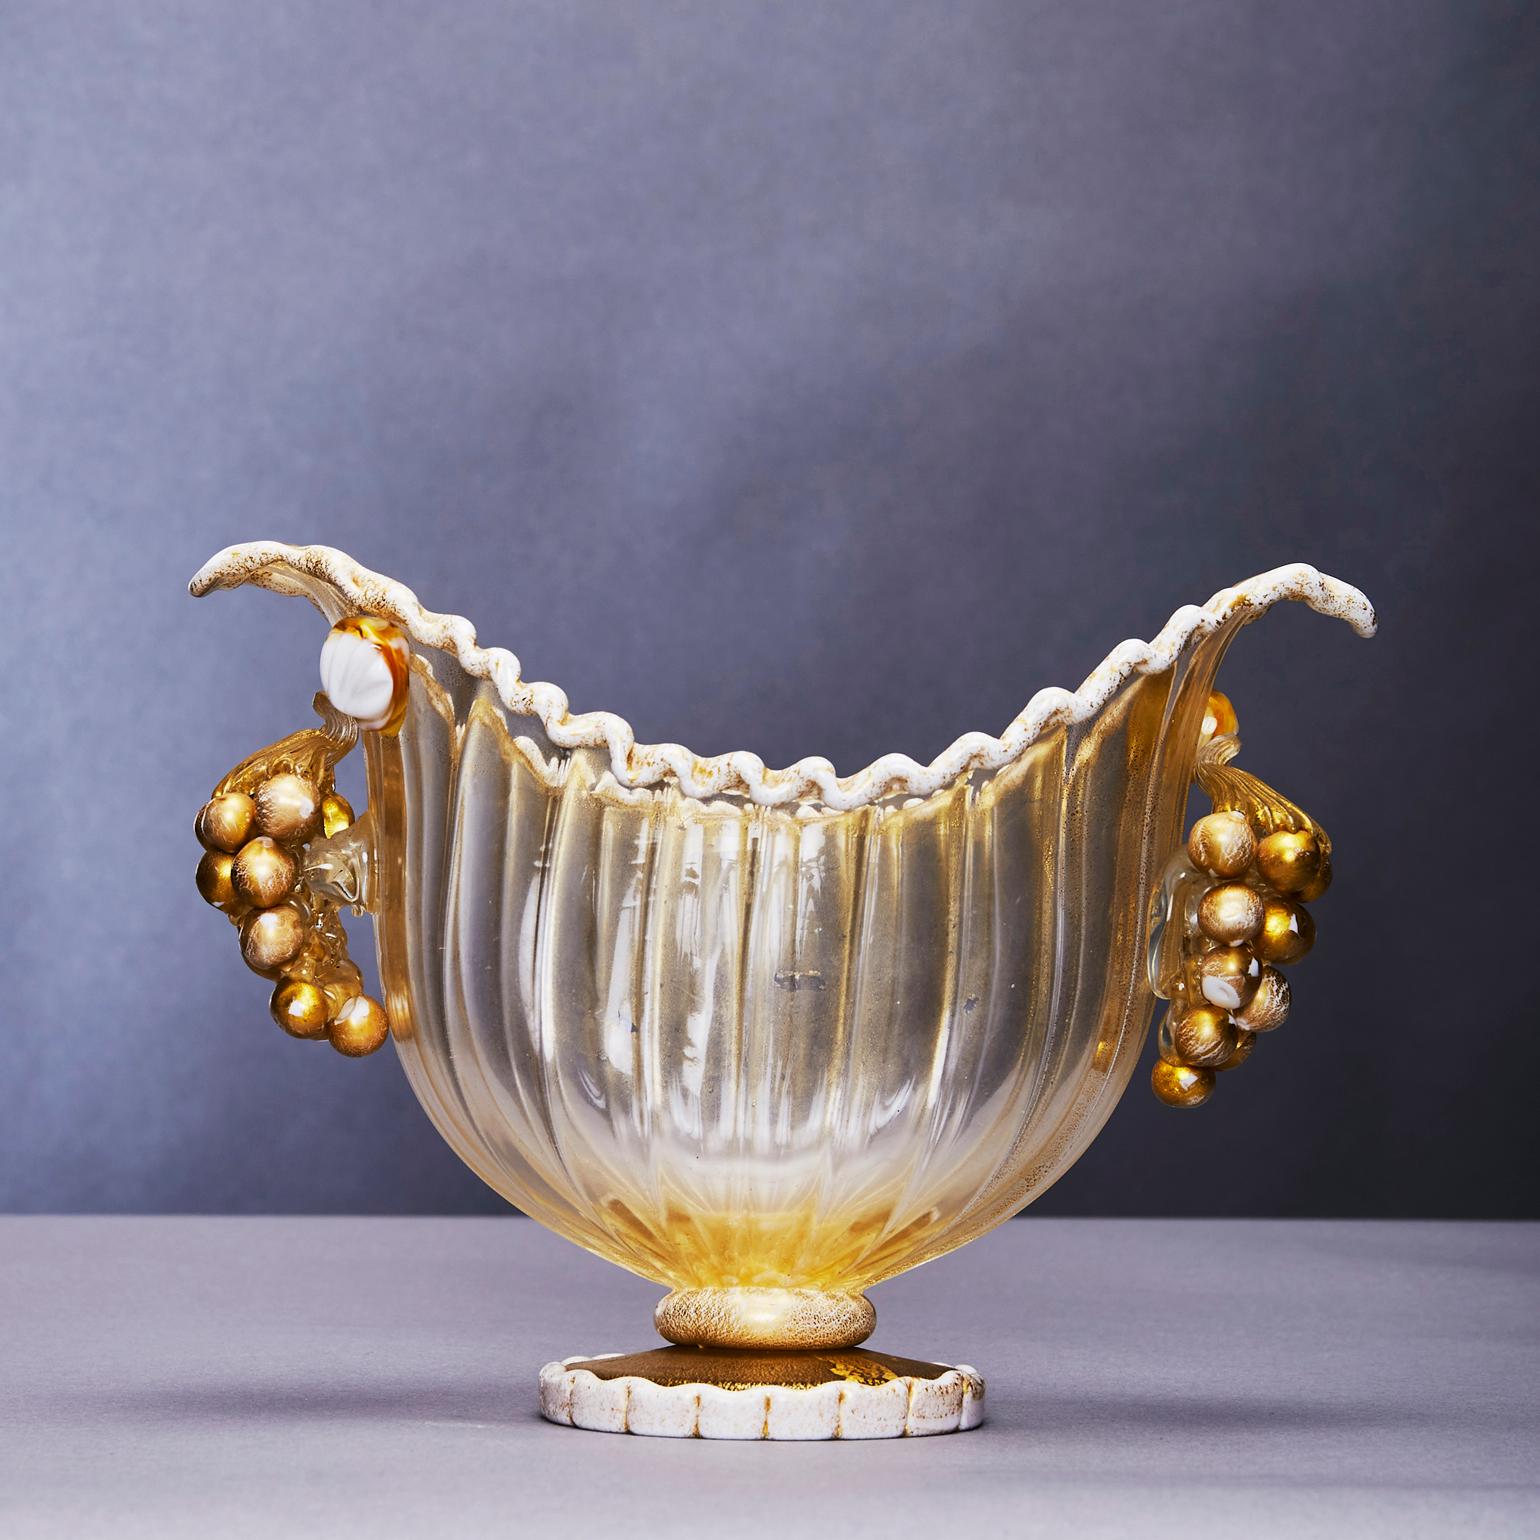 Footed Bowl Gold Leaf and Grapes, Ercole Barovier for Barovier Toso & Co 1949 For Sale 2